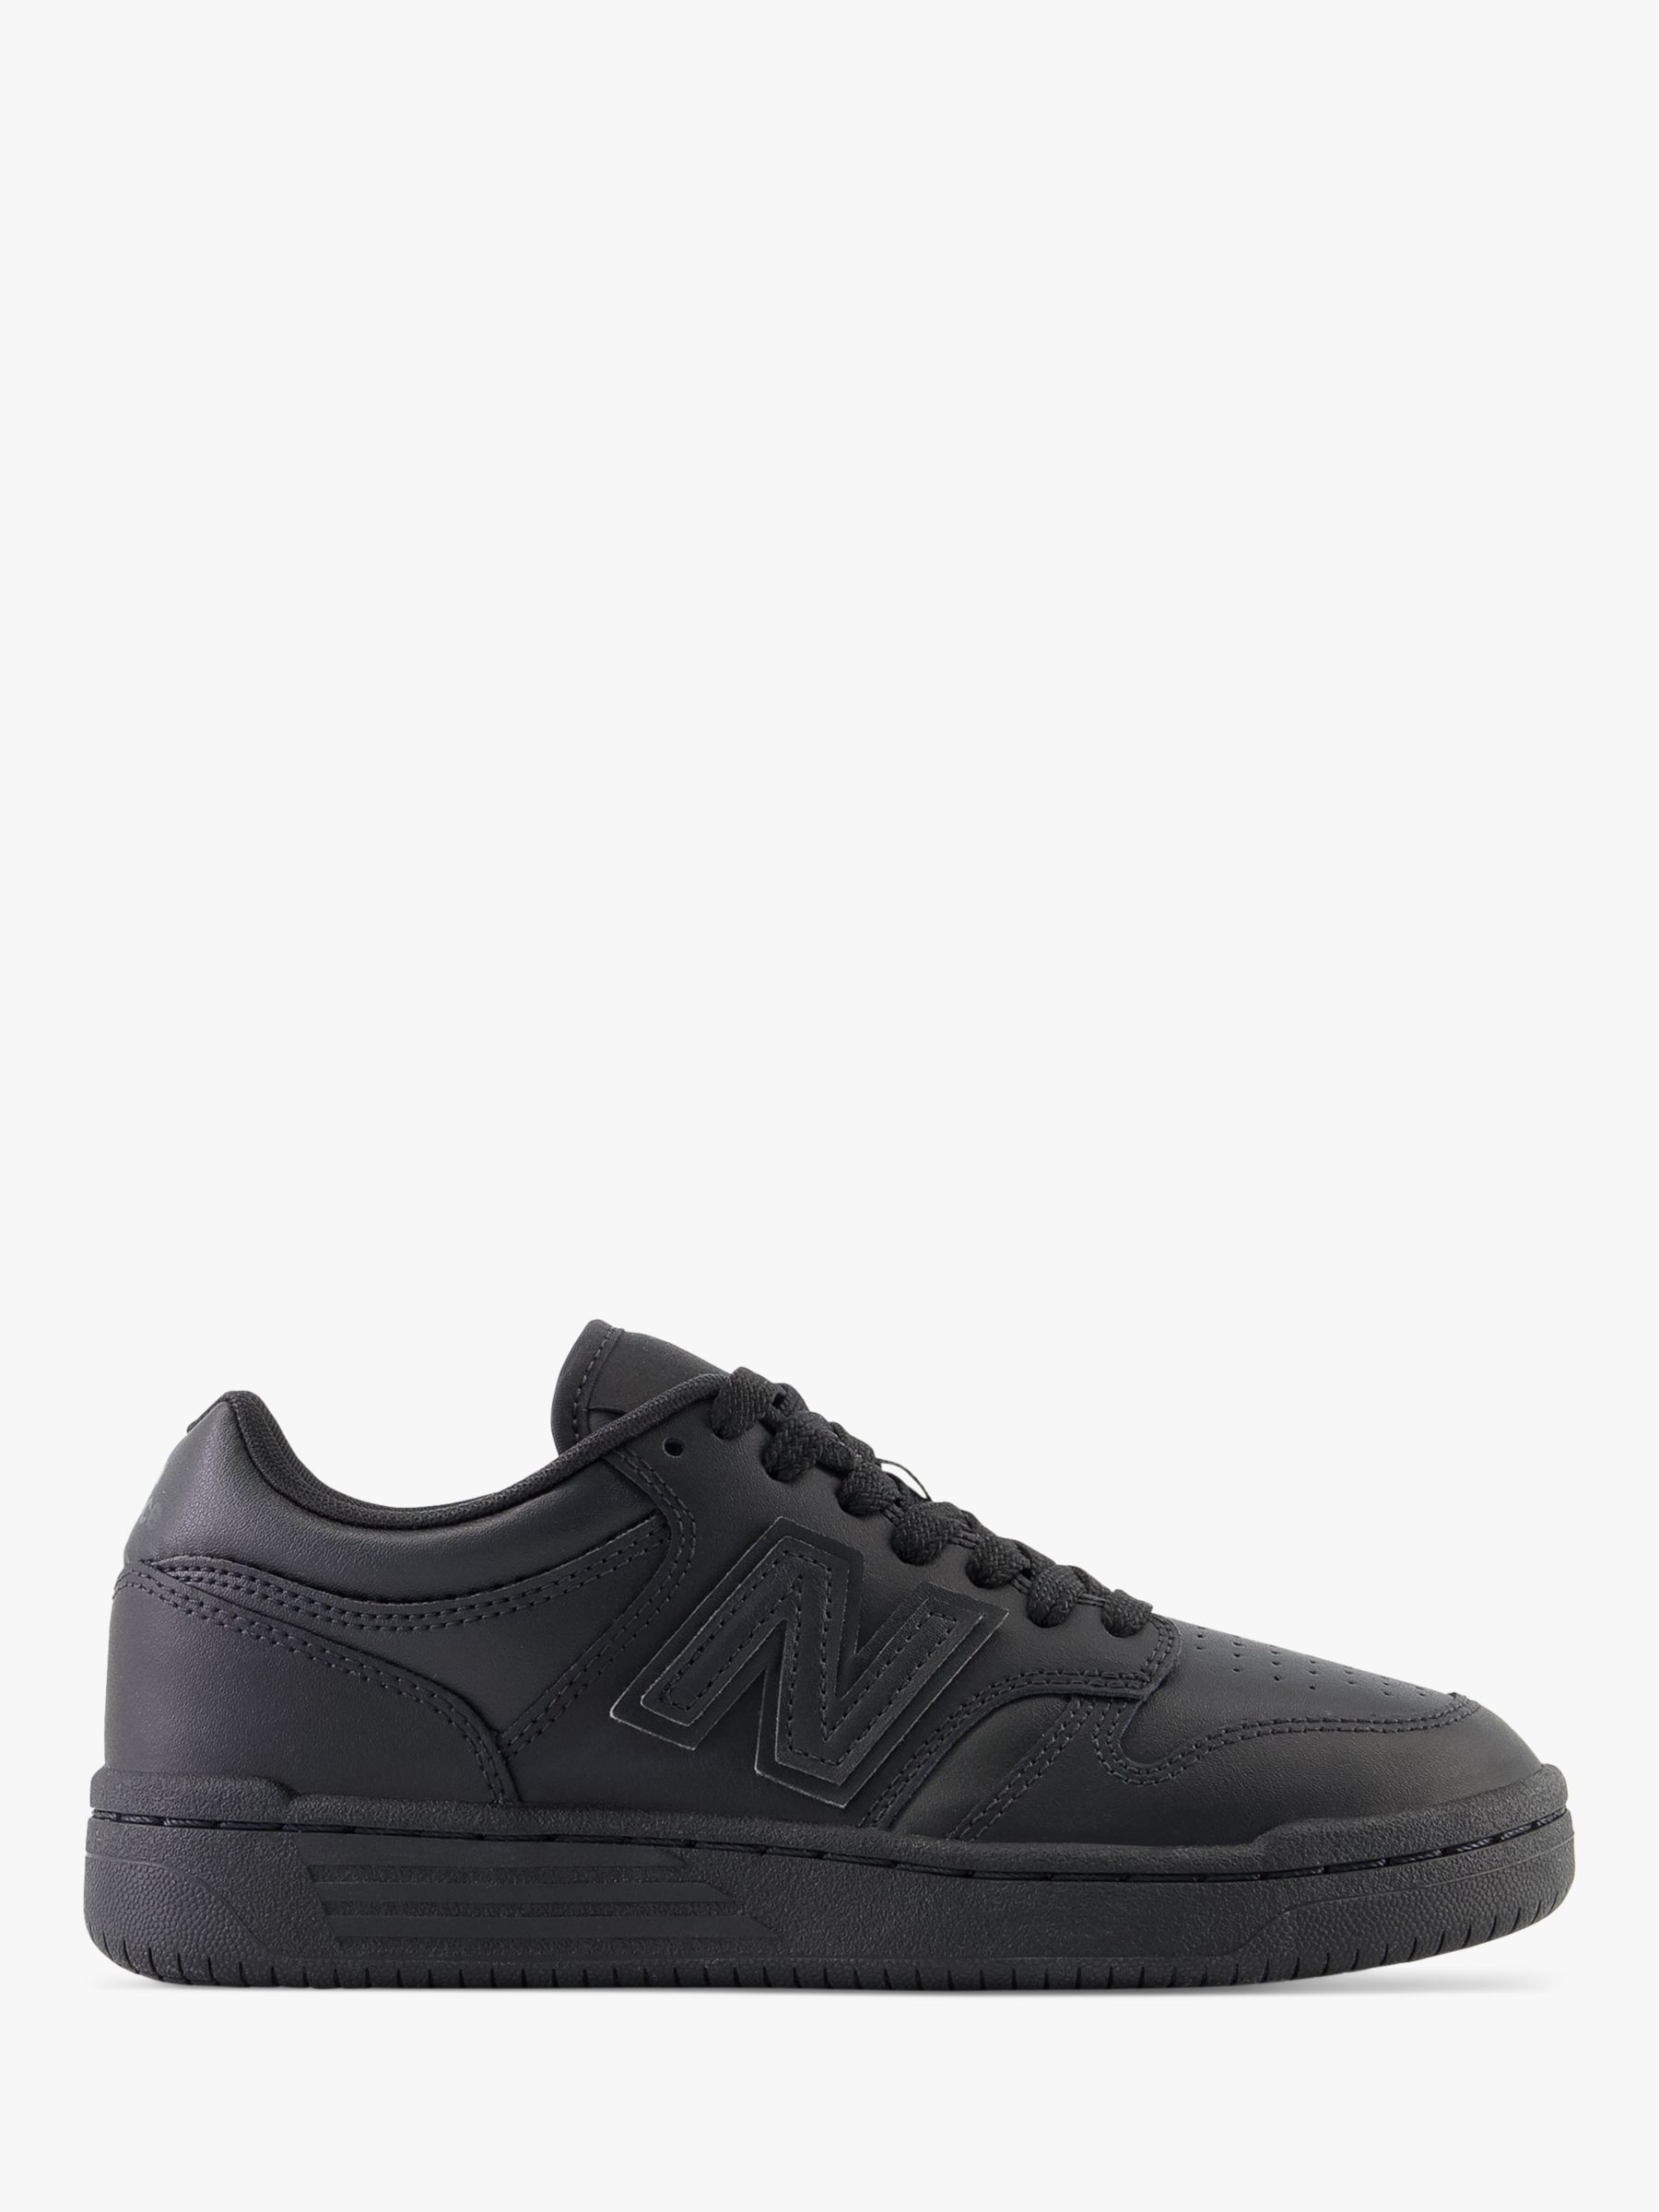 New Balance Kids' 480 Lace Up Trainers, Black at John Lewis & Partners